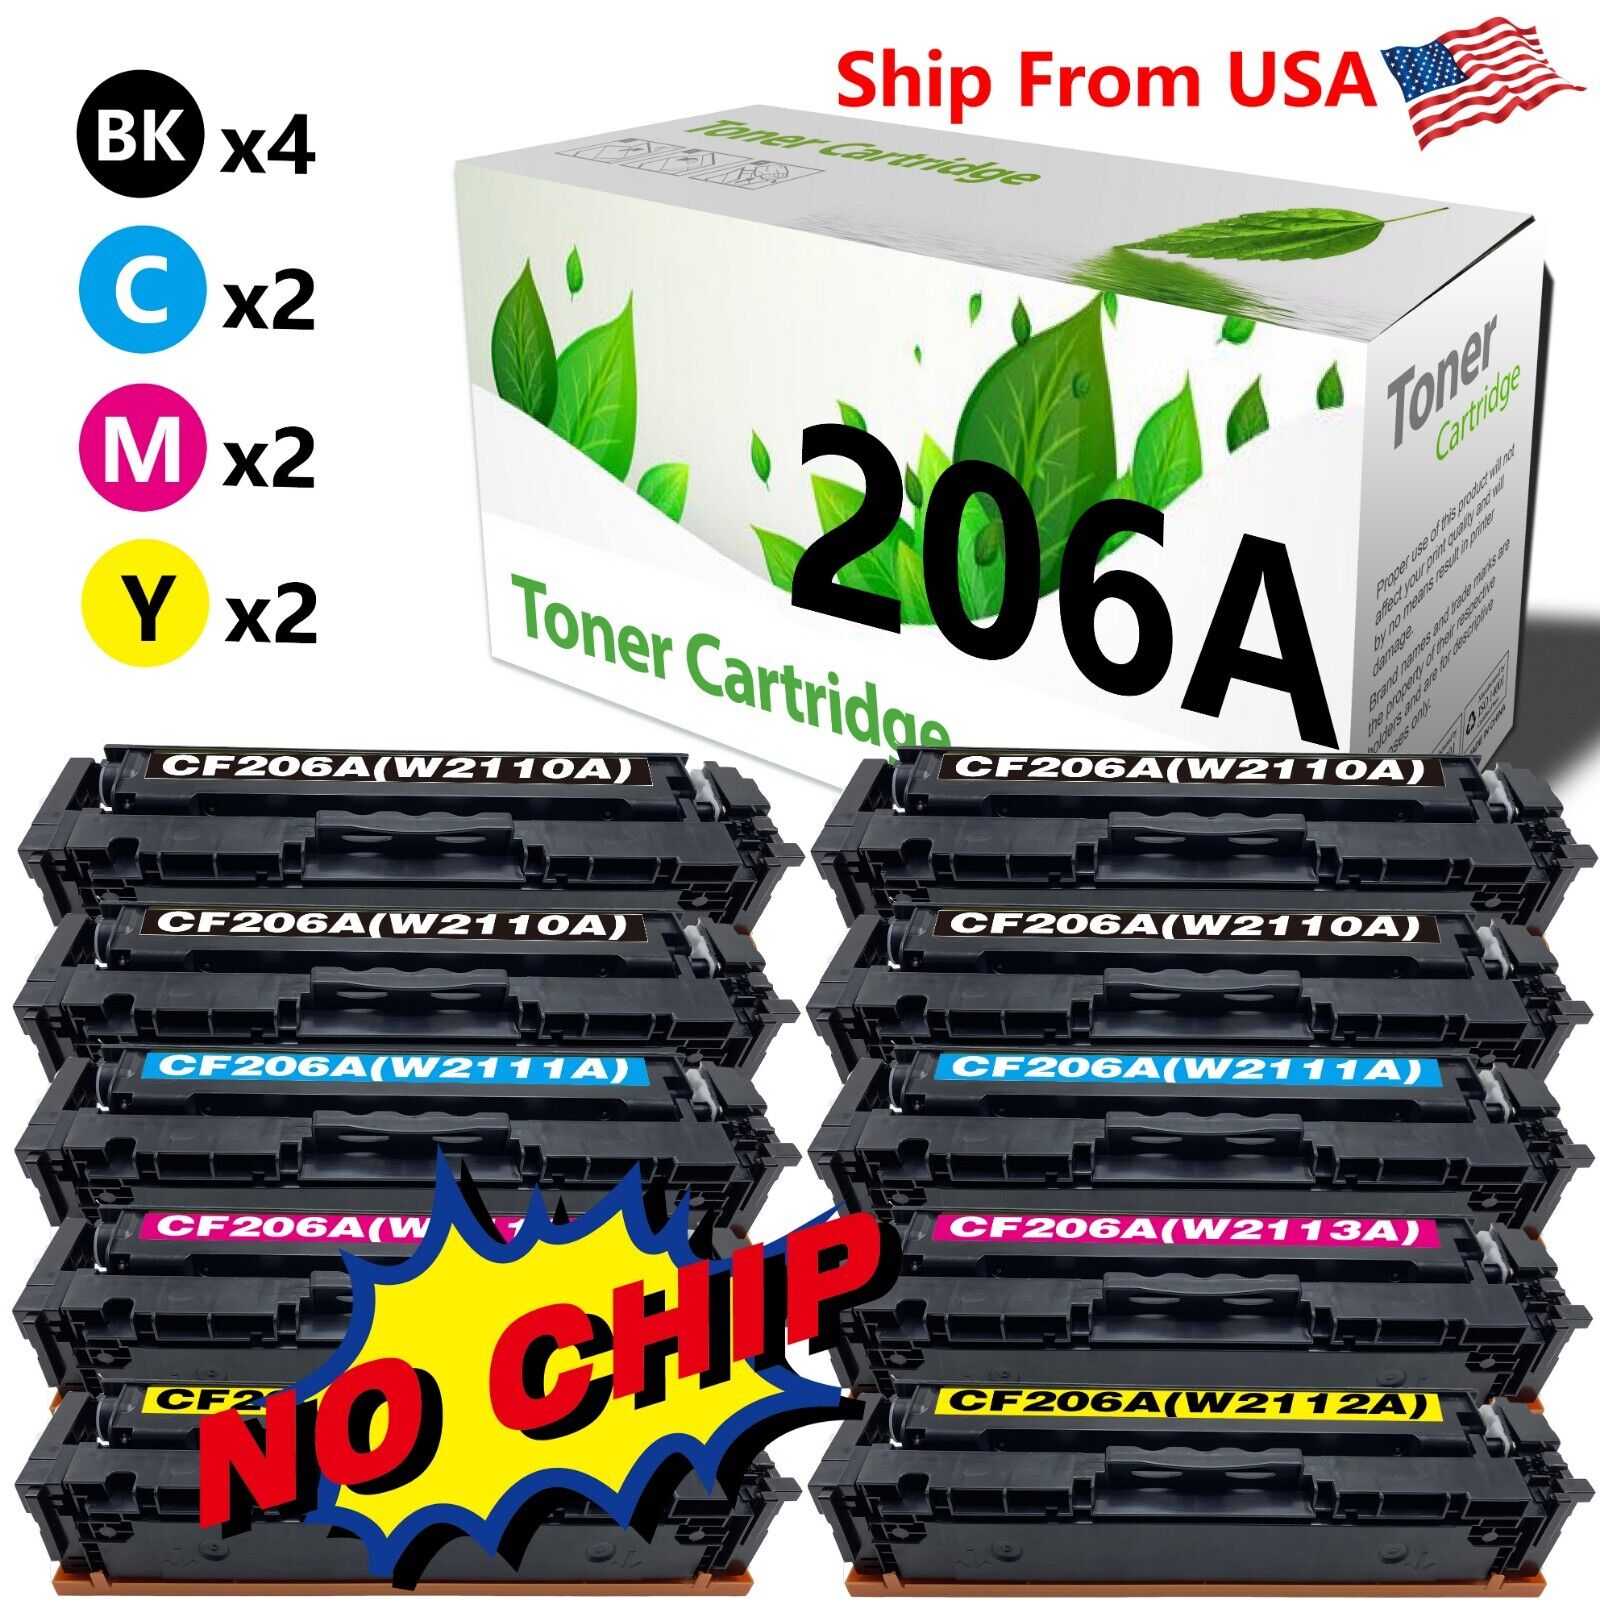 10Pack CF206A Toner Cartridges W2110A-13A no chip for M255nw M282nw M283fdw